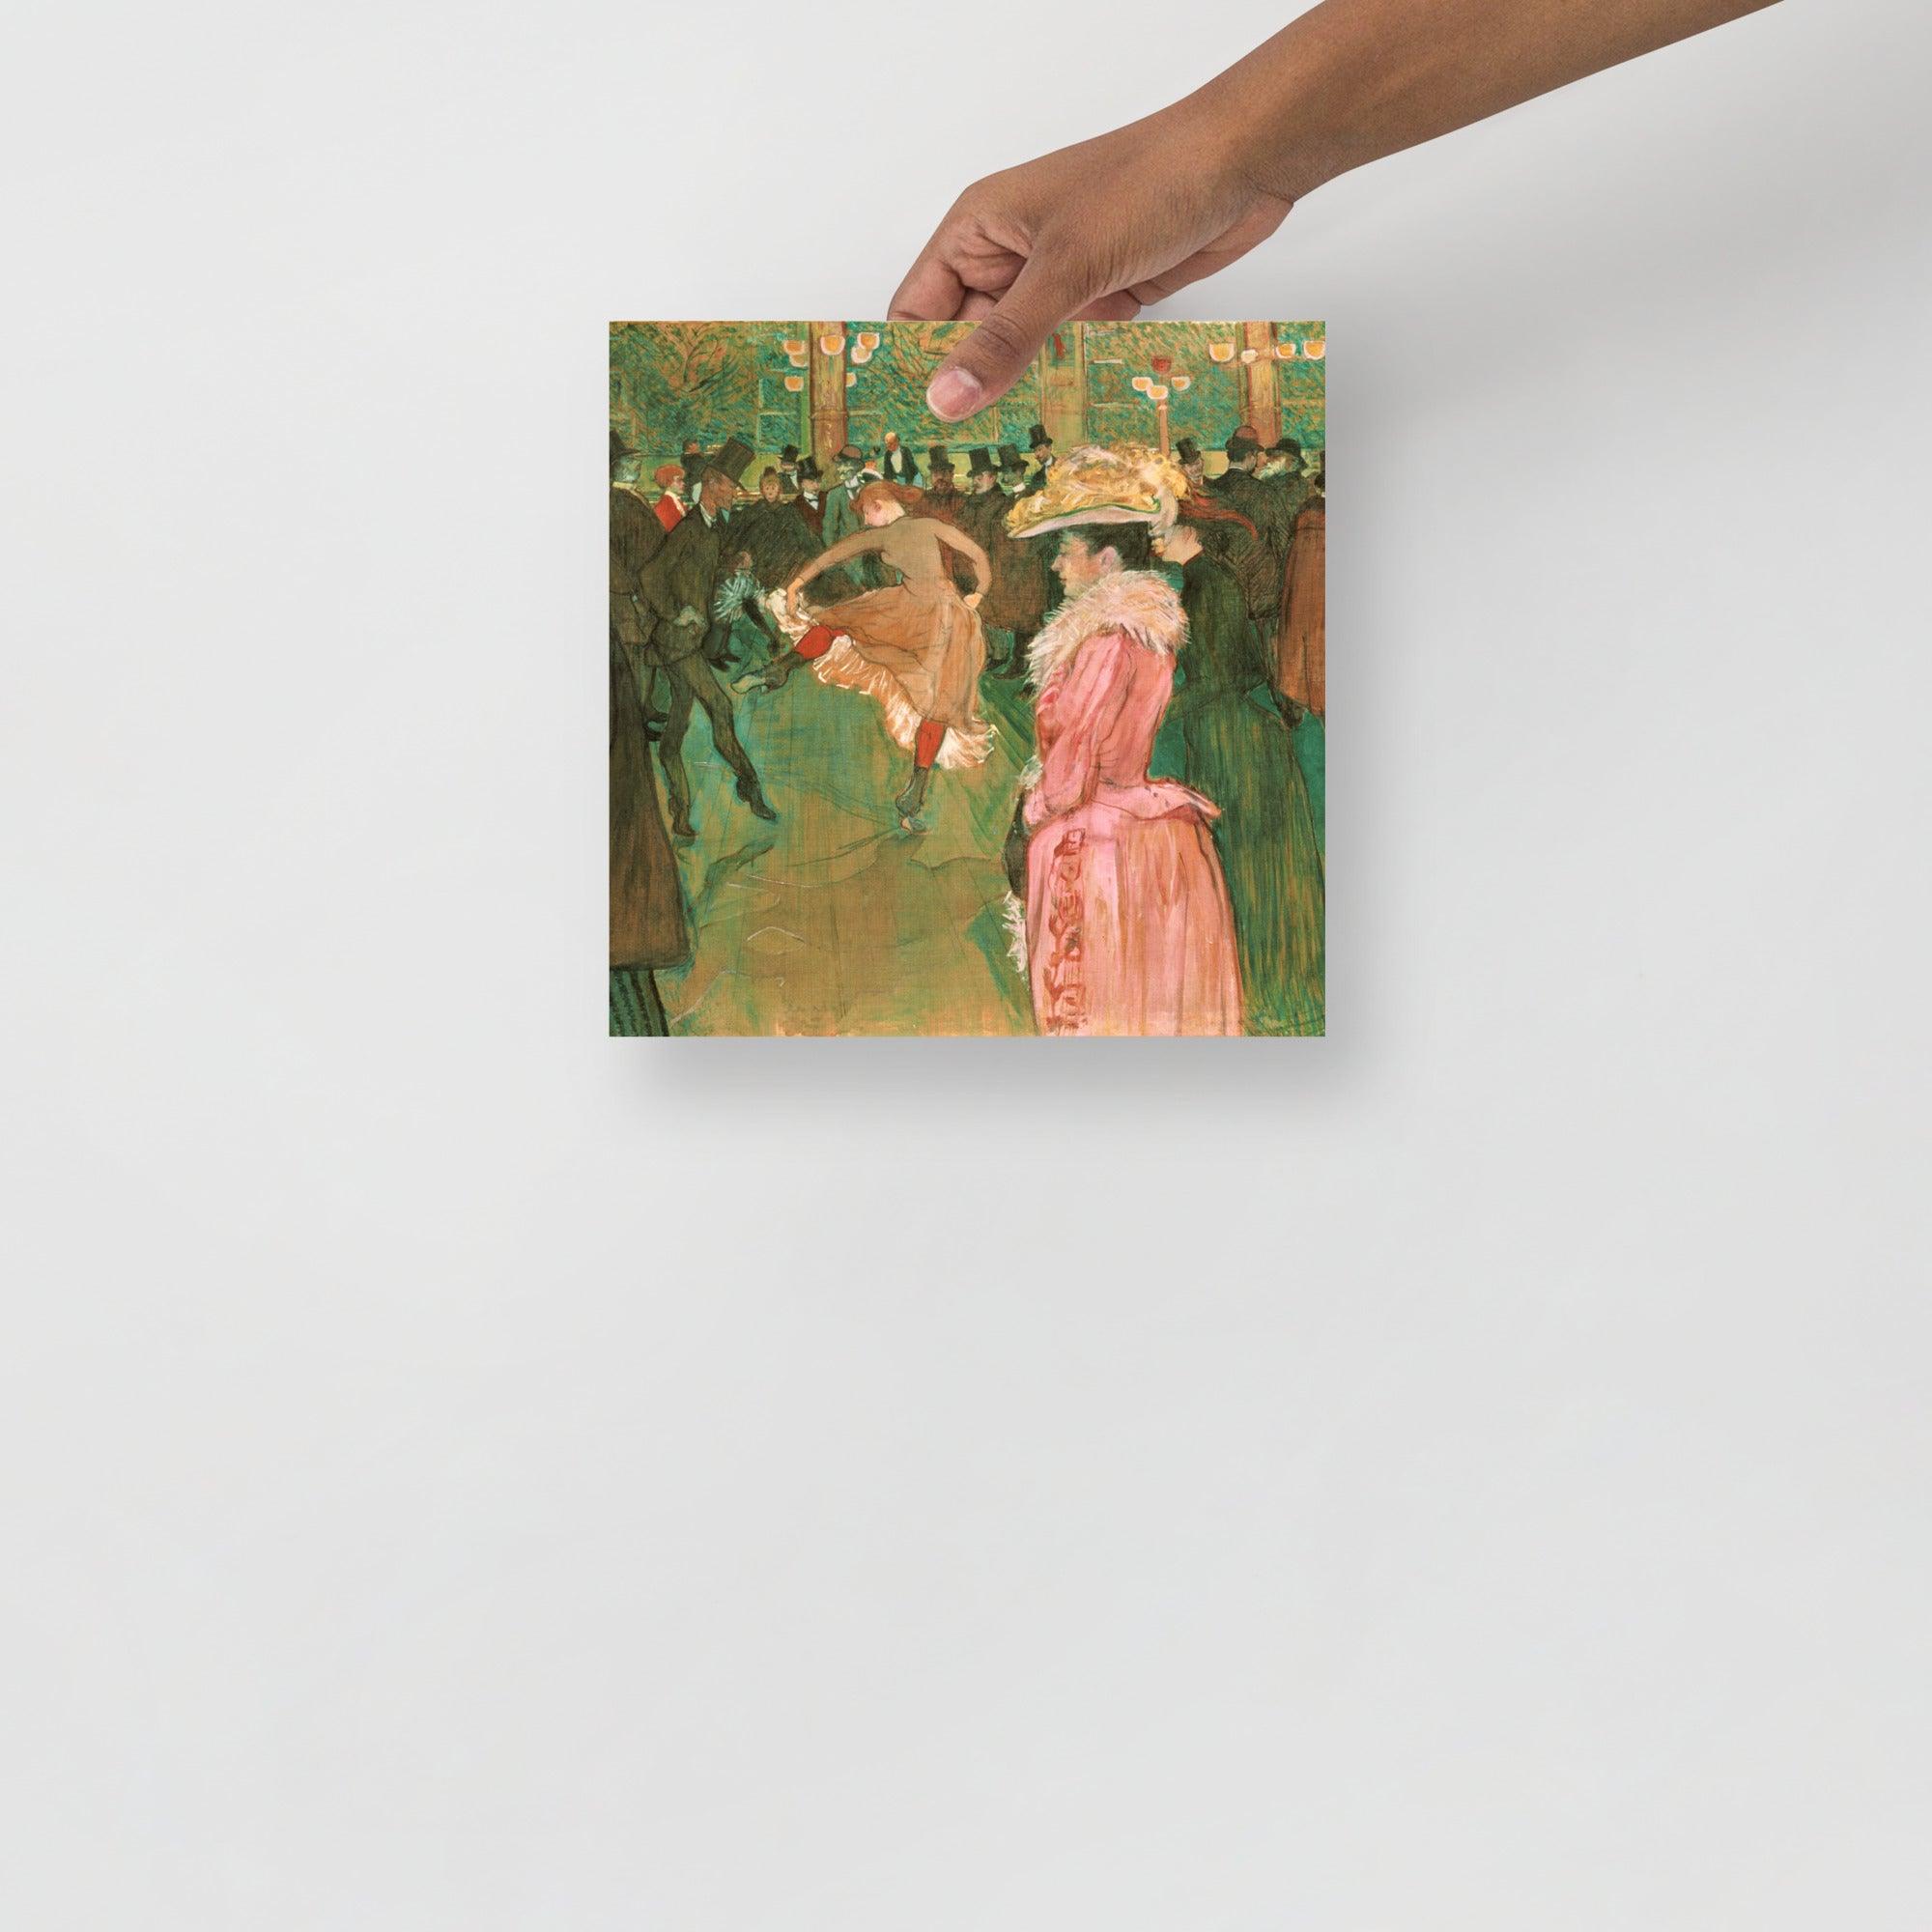 An At the Moulin Rouge: The Dance by Henri Toulouse-Lautrec poster on a plain backdrop in size 10x10”.